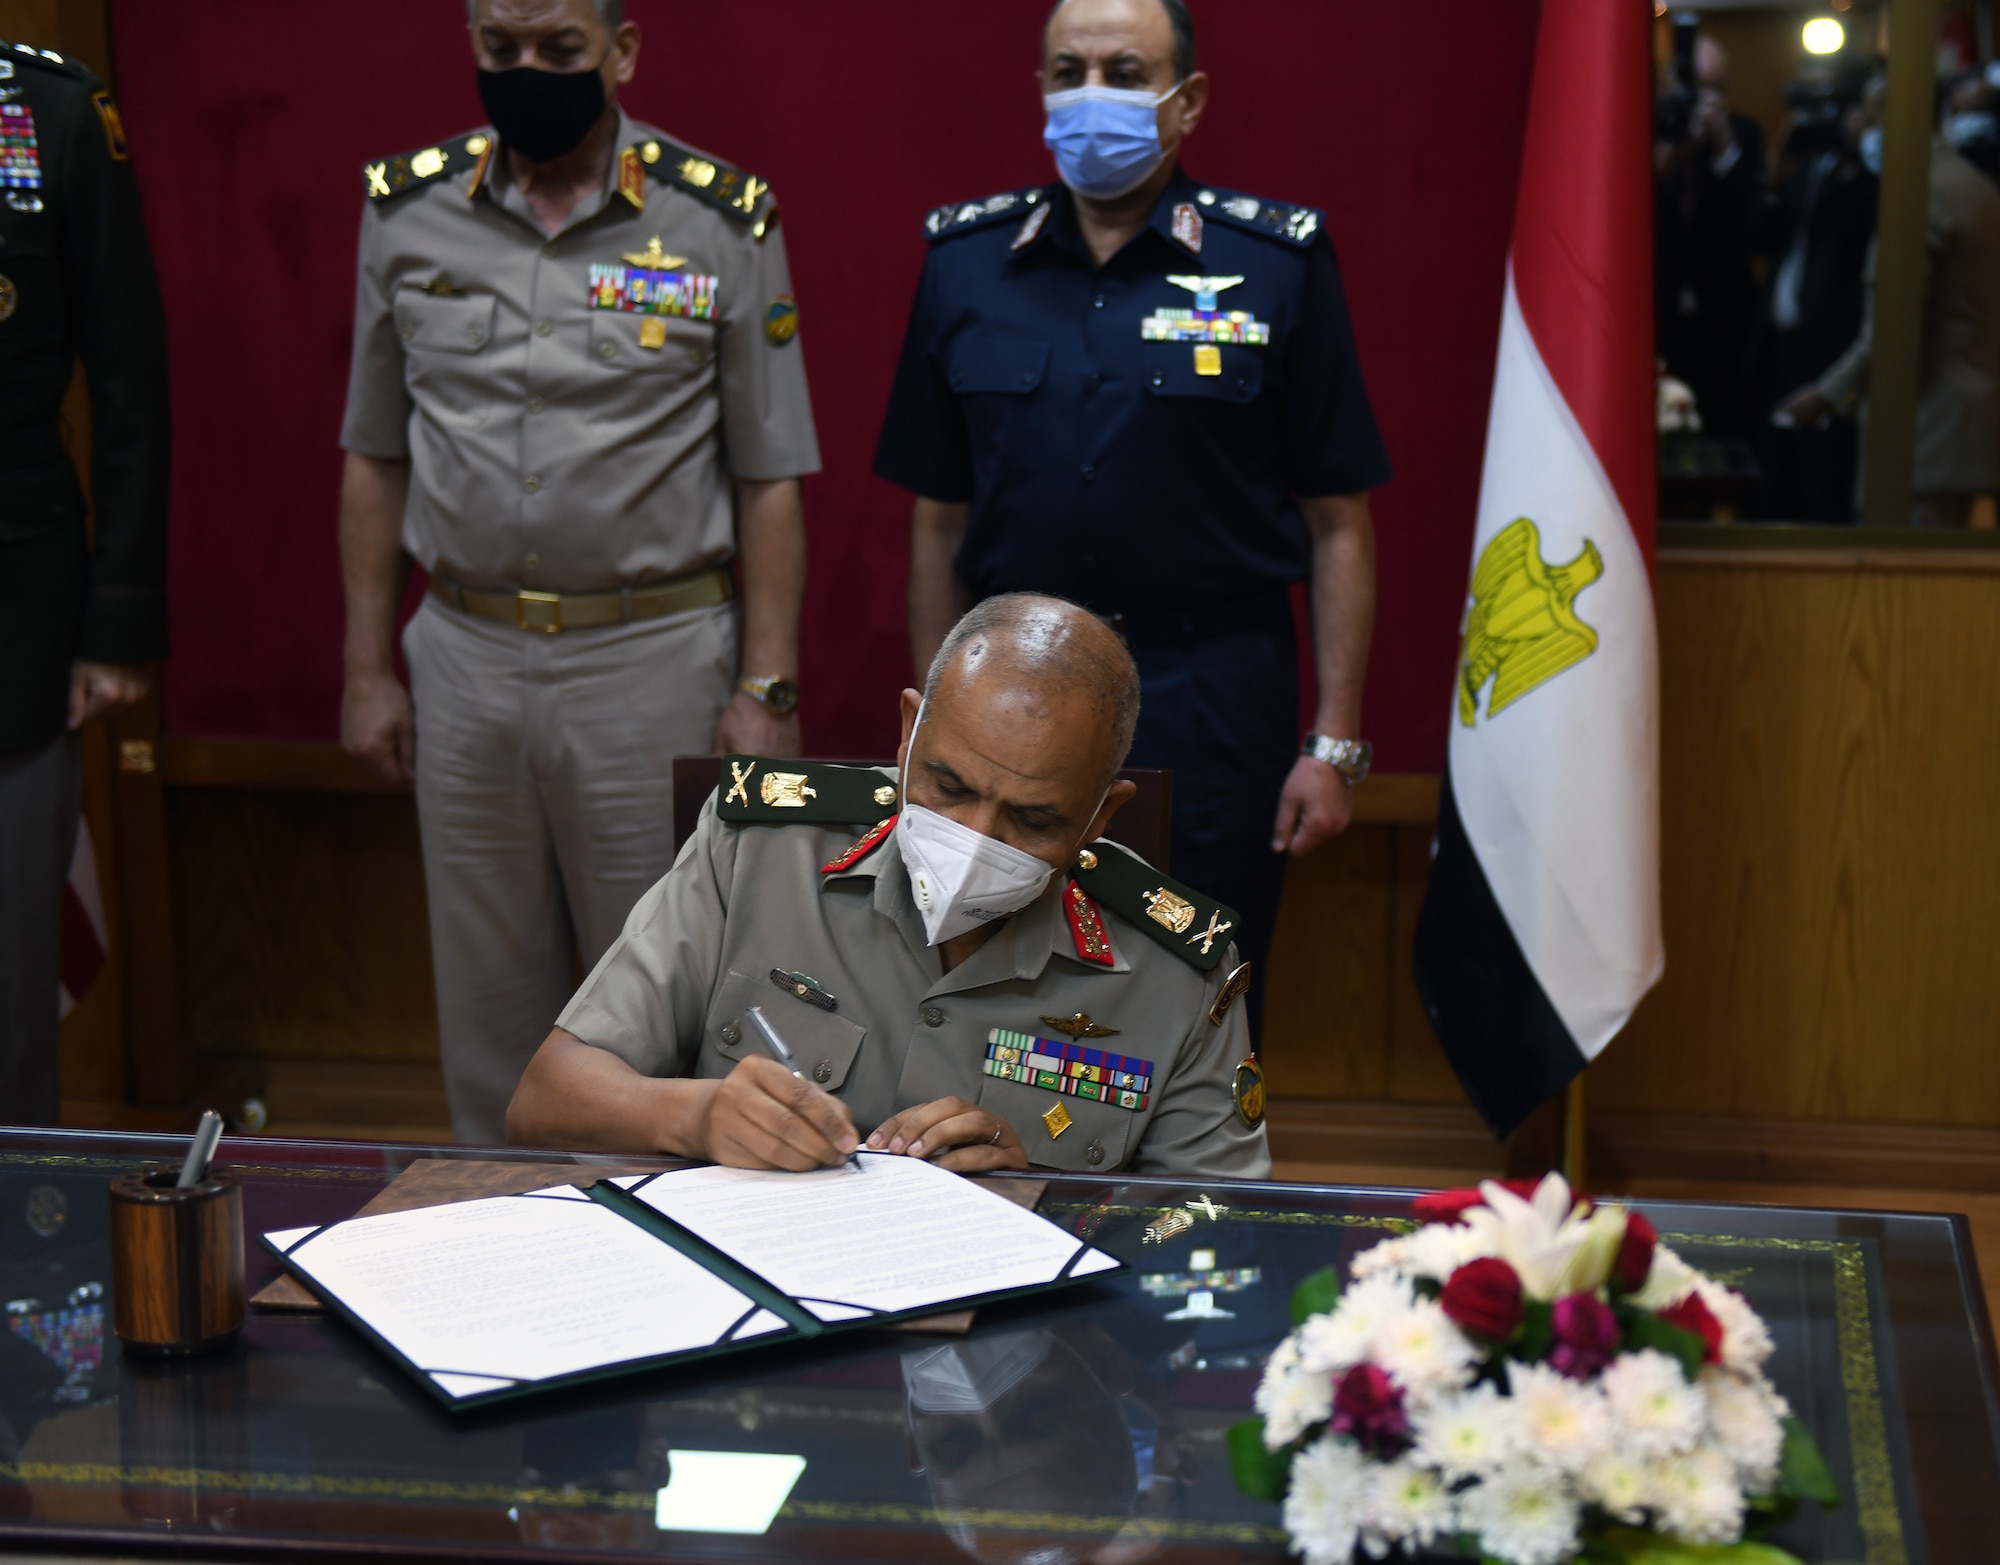 The Arab Republic of Egypt’s Assistant Minister of Defense for International Affairs, Maj. Gen. Mohamed Salah signs a document formalizing the pairing of Egypt and the Texas National Guard in the Department of Defense National Guard State Partnership Program, Cairo, Egypt, June 14, 2021.